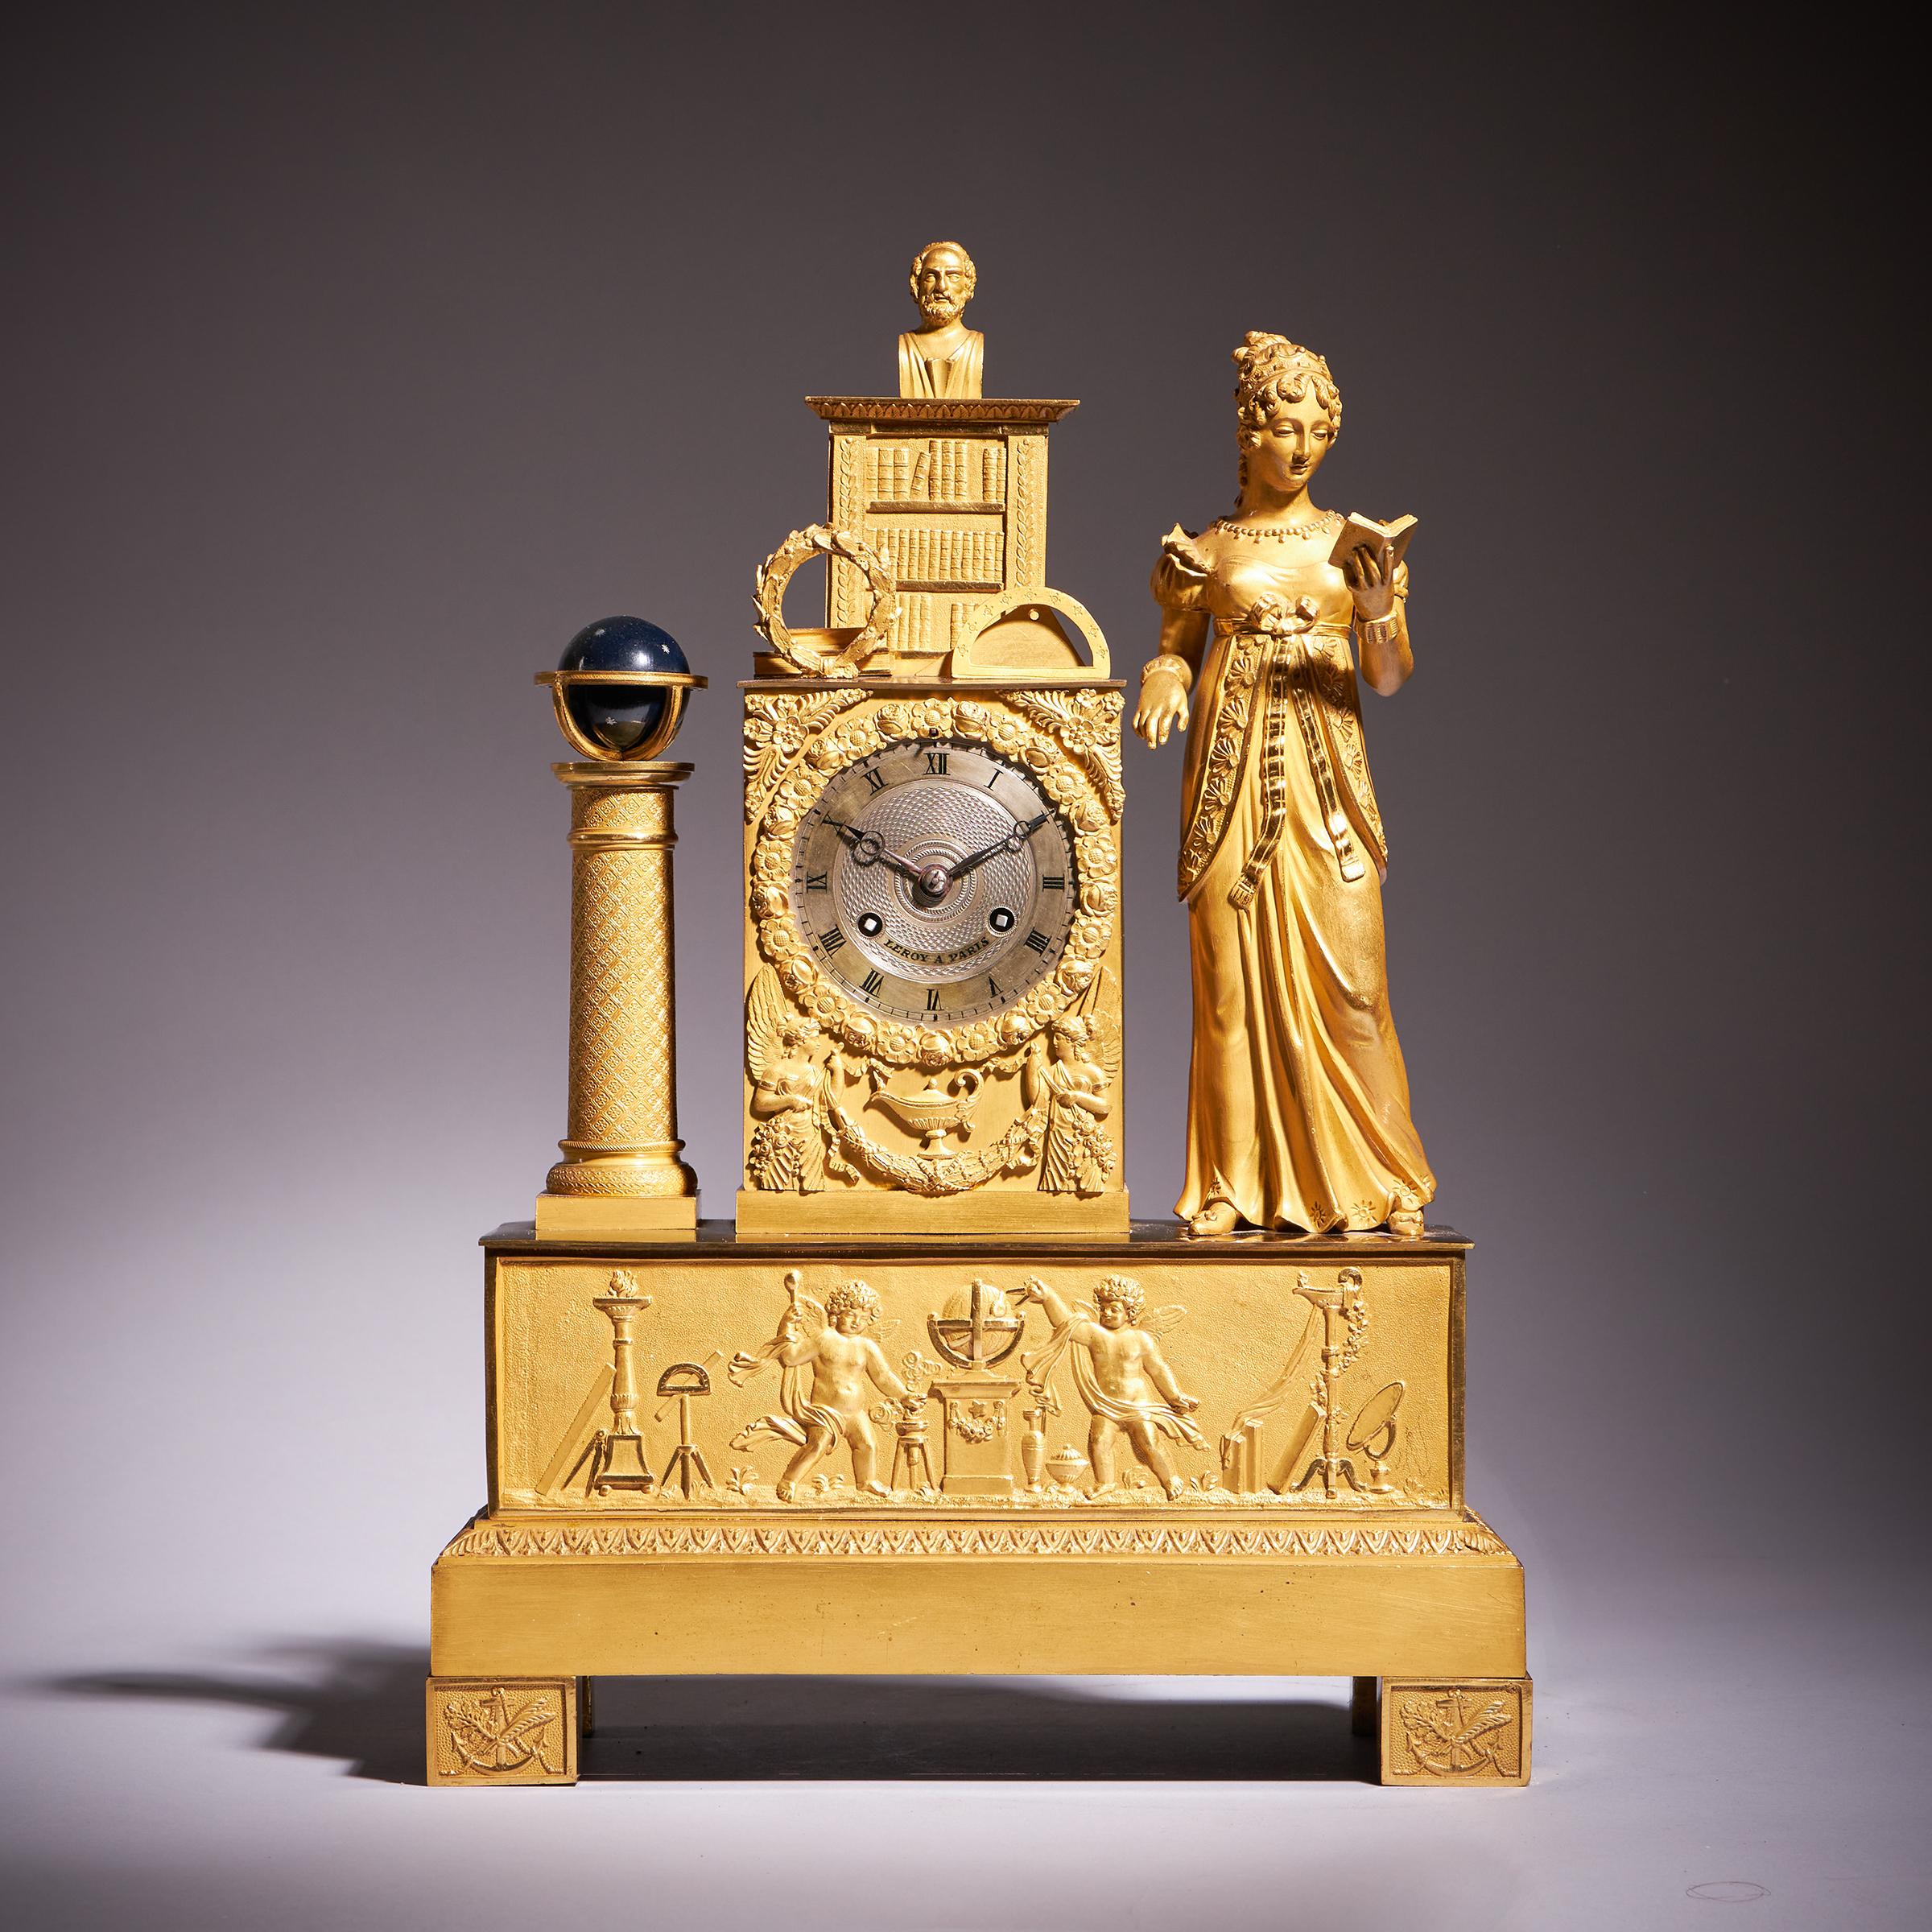 A most beautiful French ornolu mantel clock by Leroy à Paris

A lovely French late Empire/early Charles X mantel clock with an ormolu case, c. 1825. The ormolu brass case depicts a celebration of Science and Learning. It is dominated by a